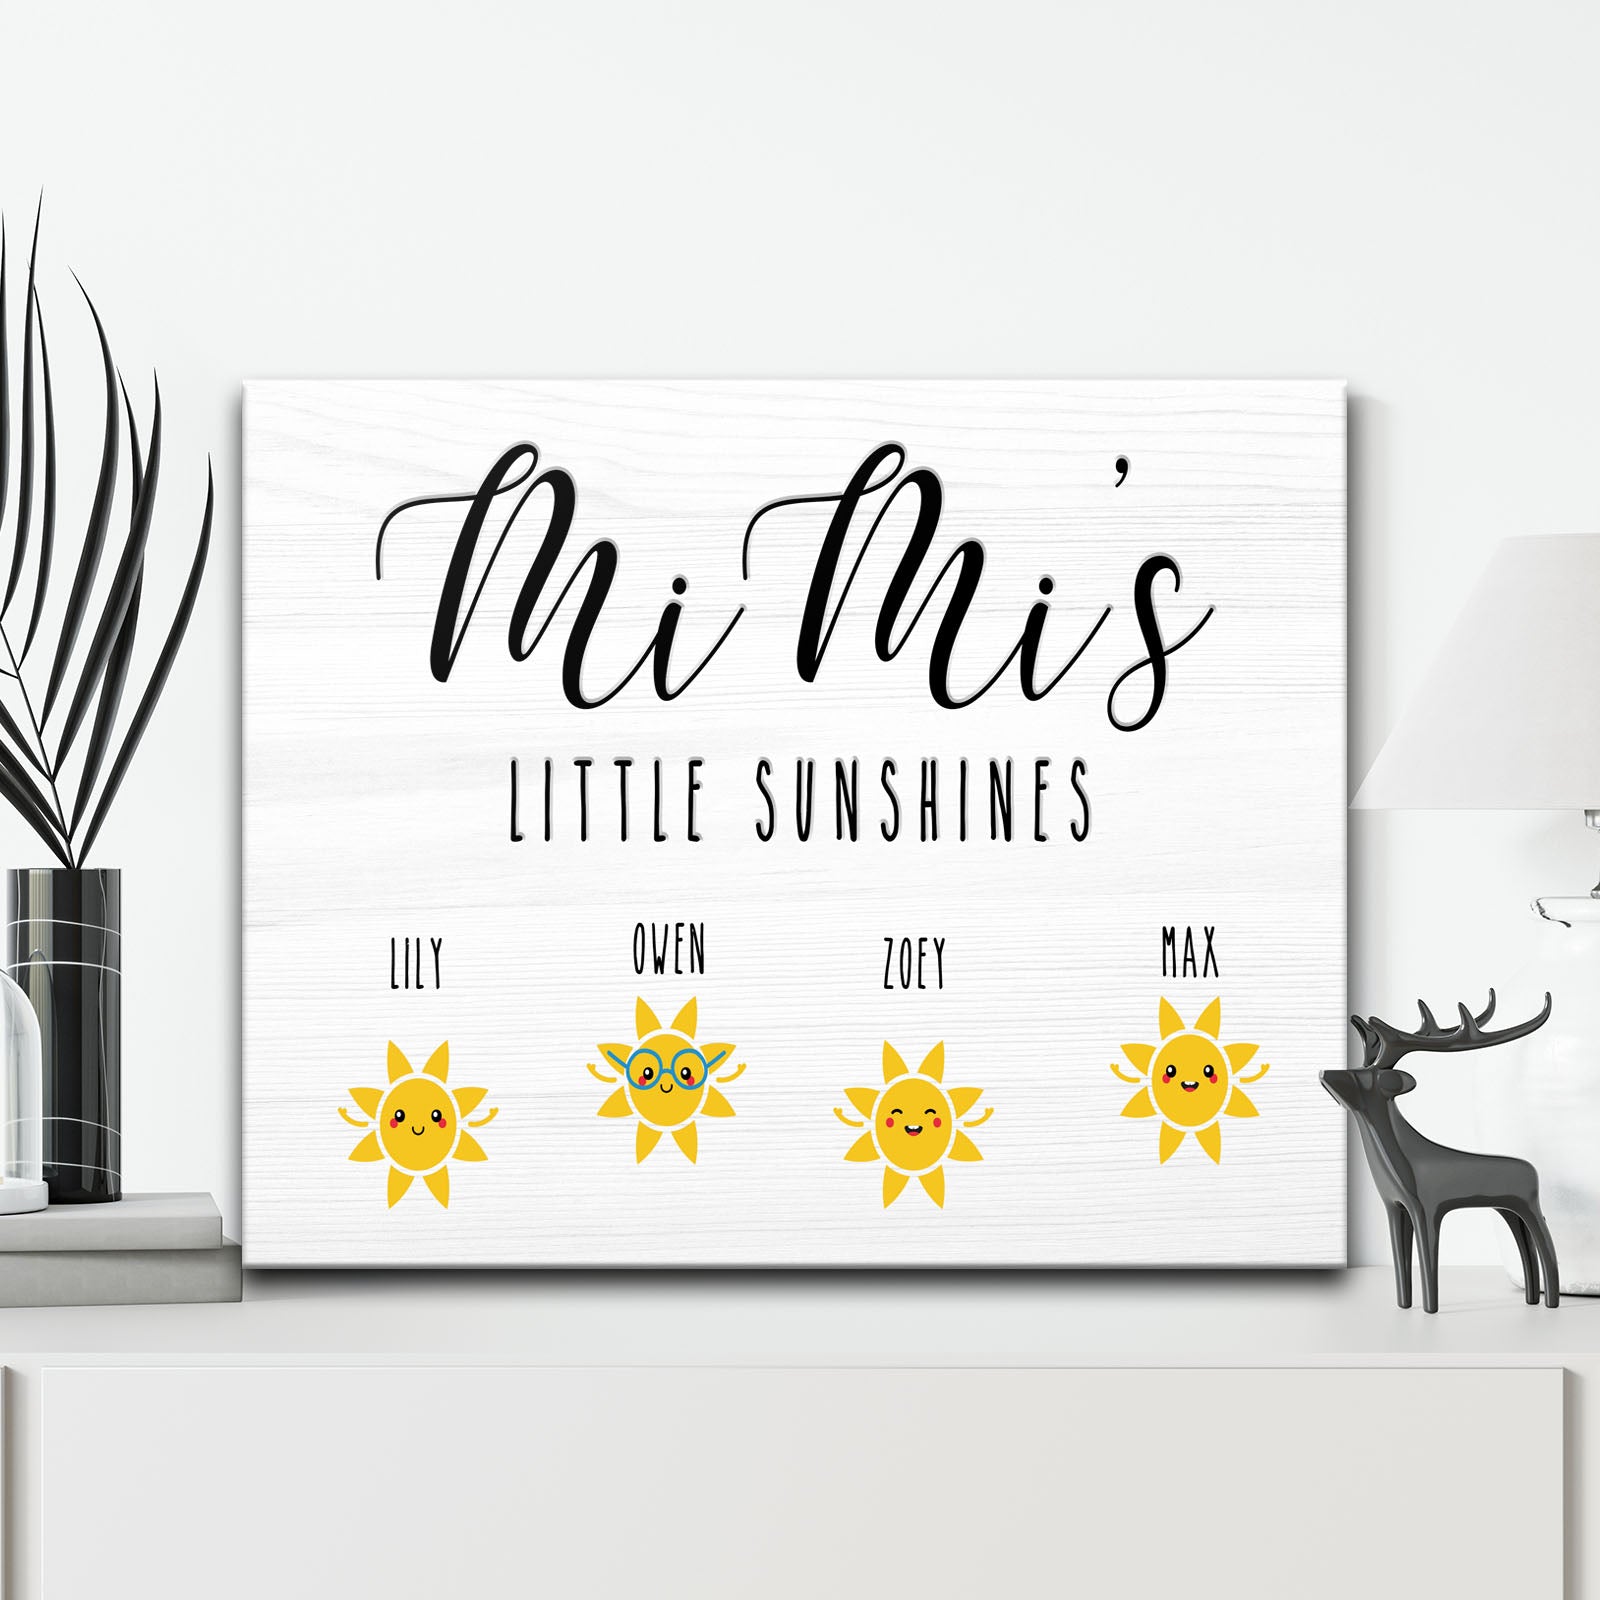 Mimi's Little Sunshines Sign - Image by Tailored Canvases